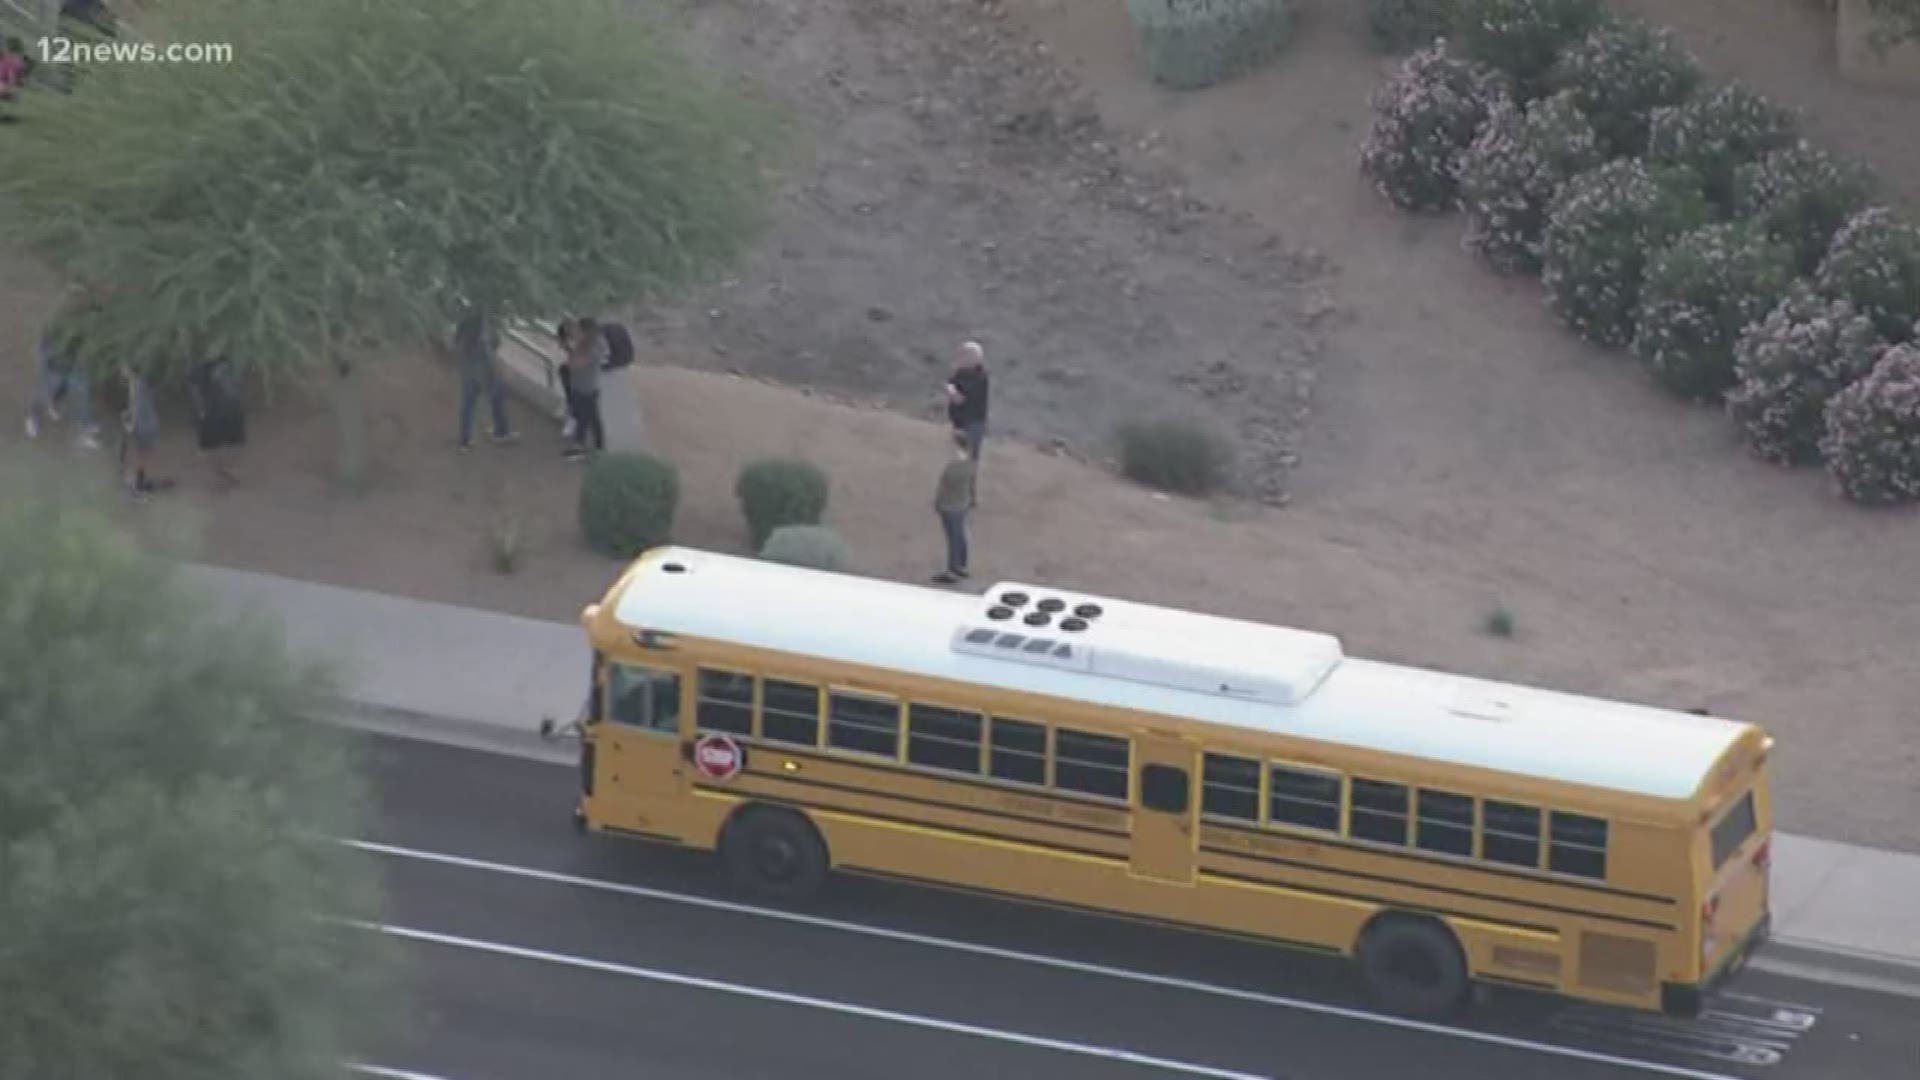 A boy was hit by a bus in Goodyear just hours after a teen was hit and killed by a car in a crosswalk in Peoria.